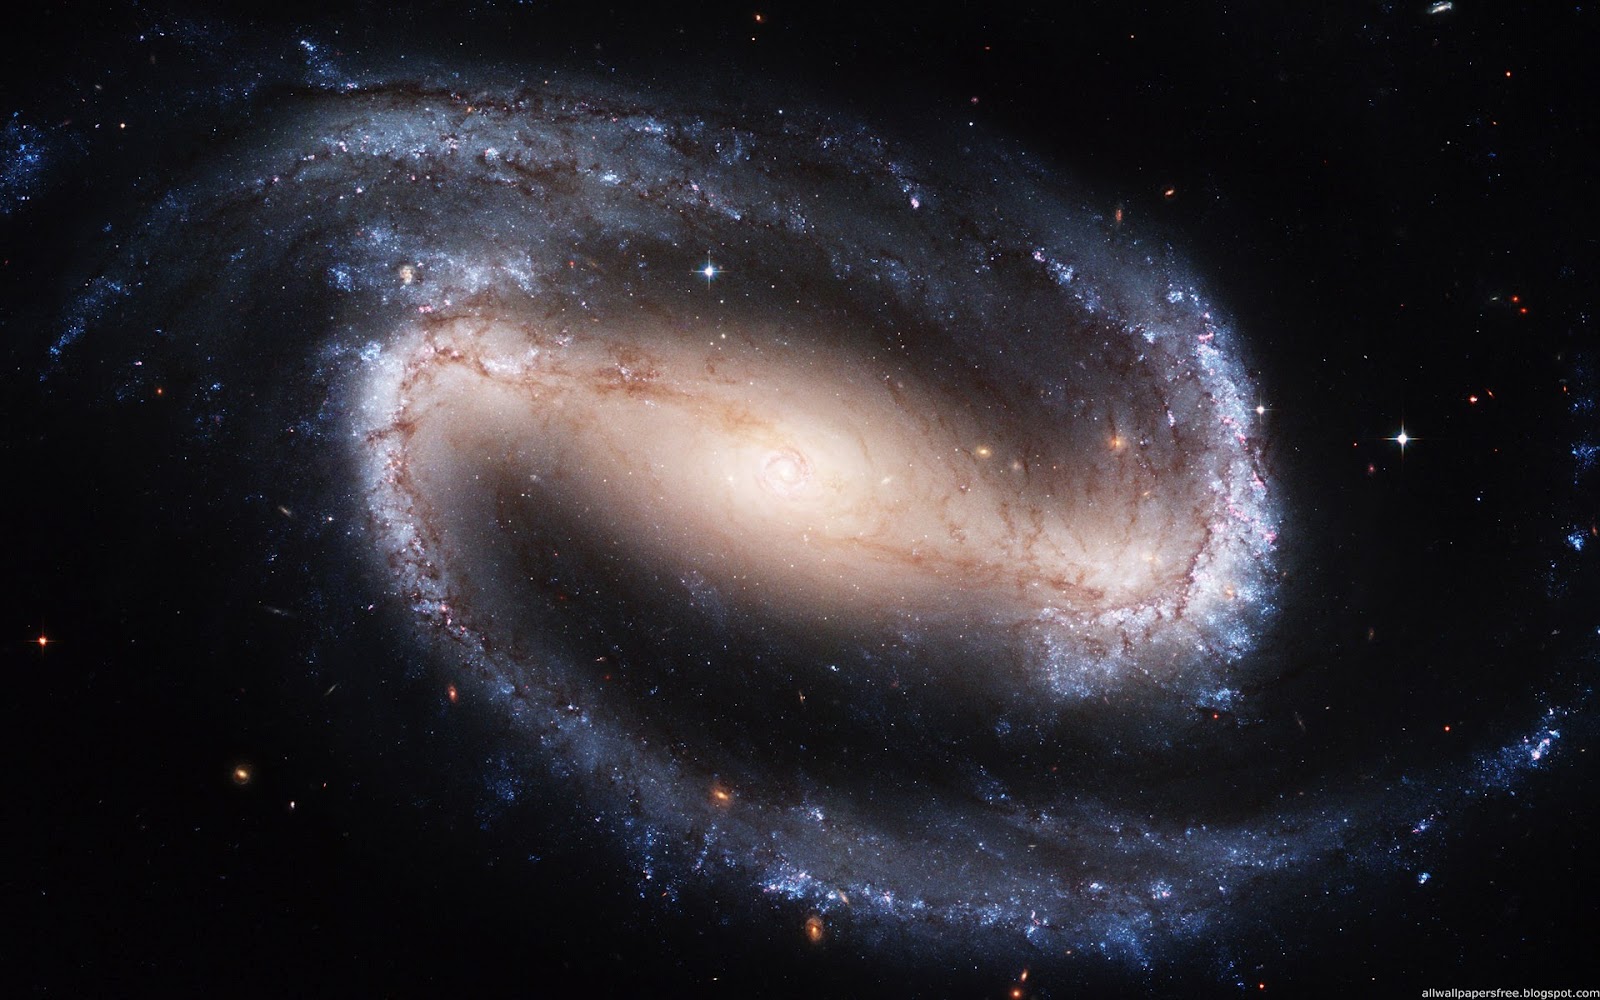 20_Pictures_From_Hubble_Telescope_Wallpapers_1920_X_1200-8_jpg_4.jpg